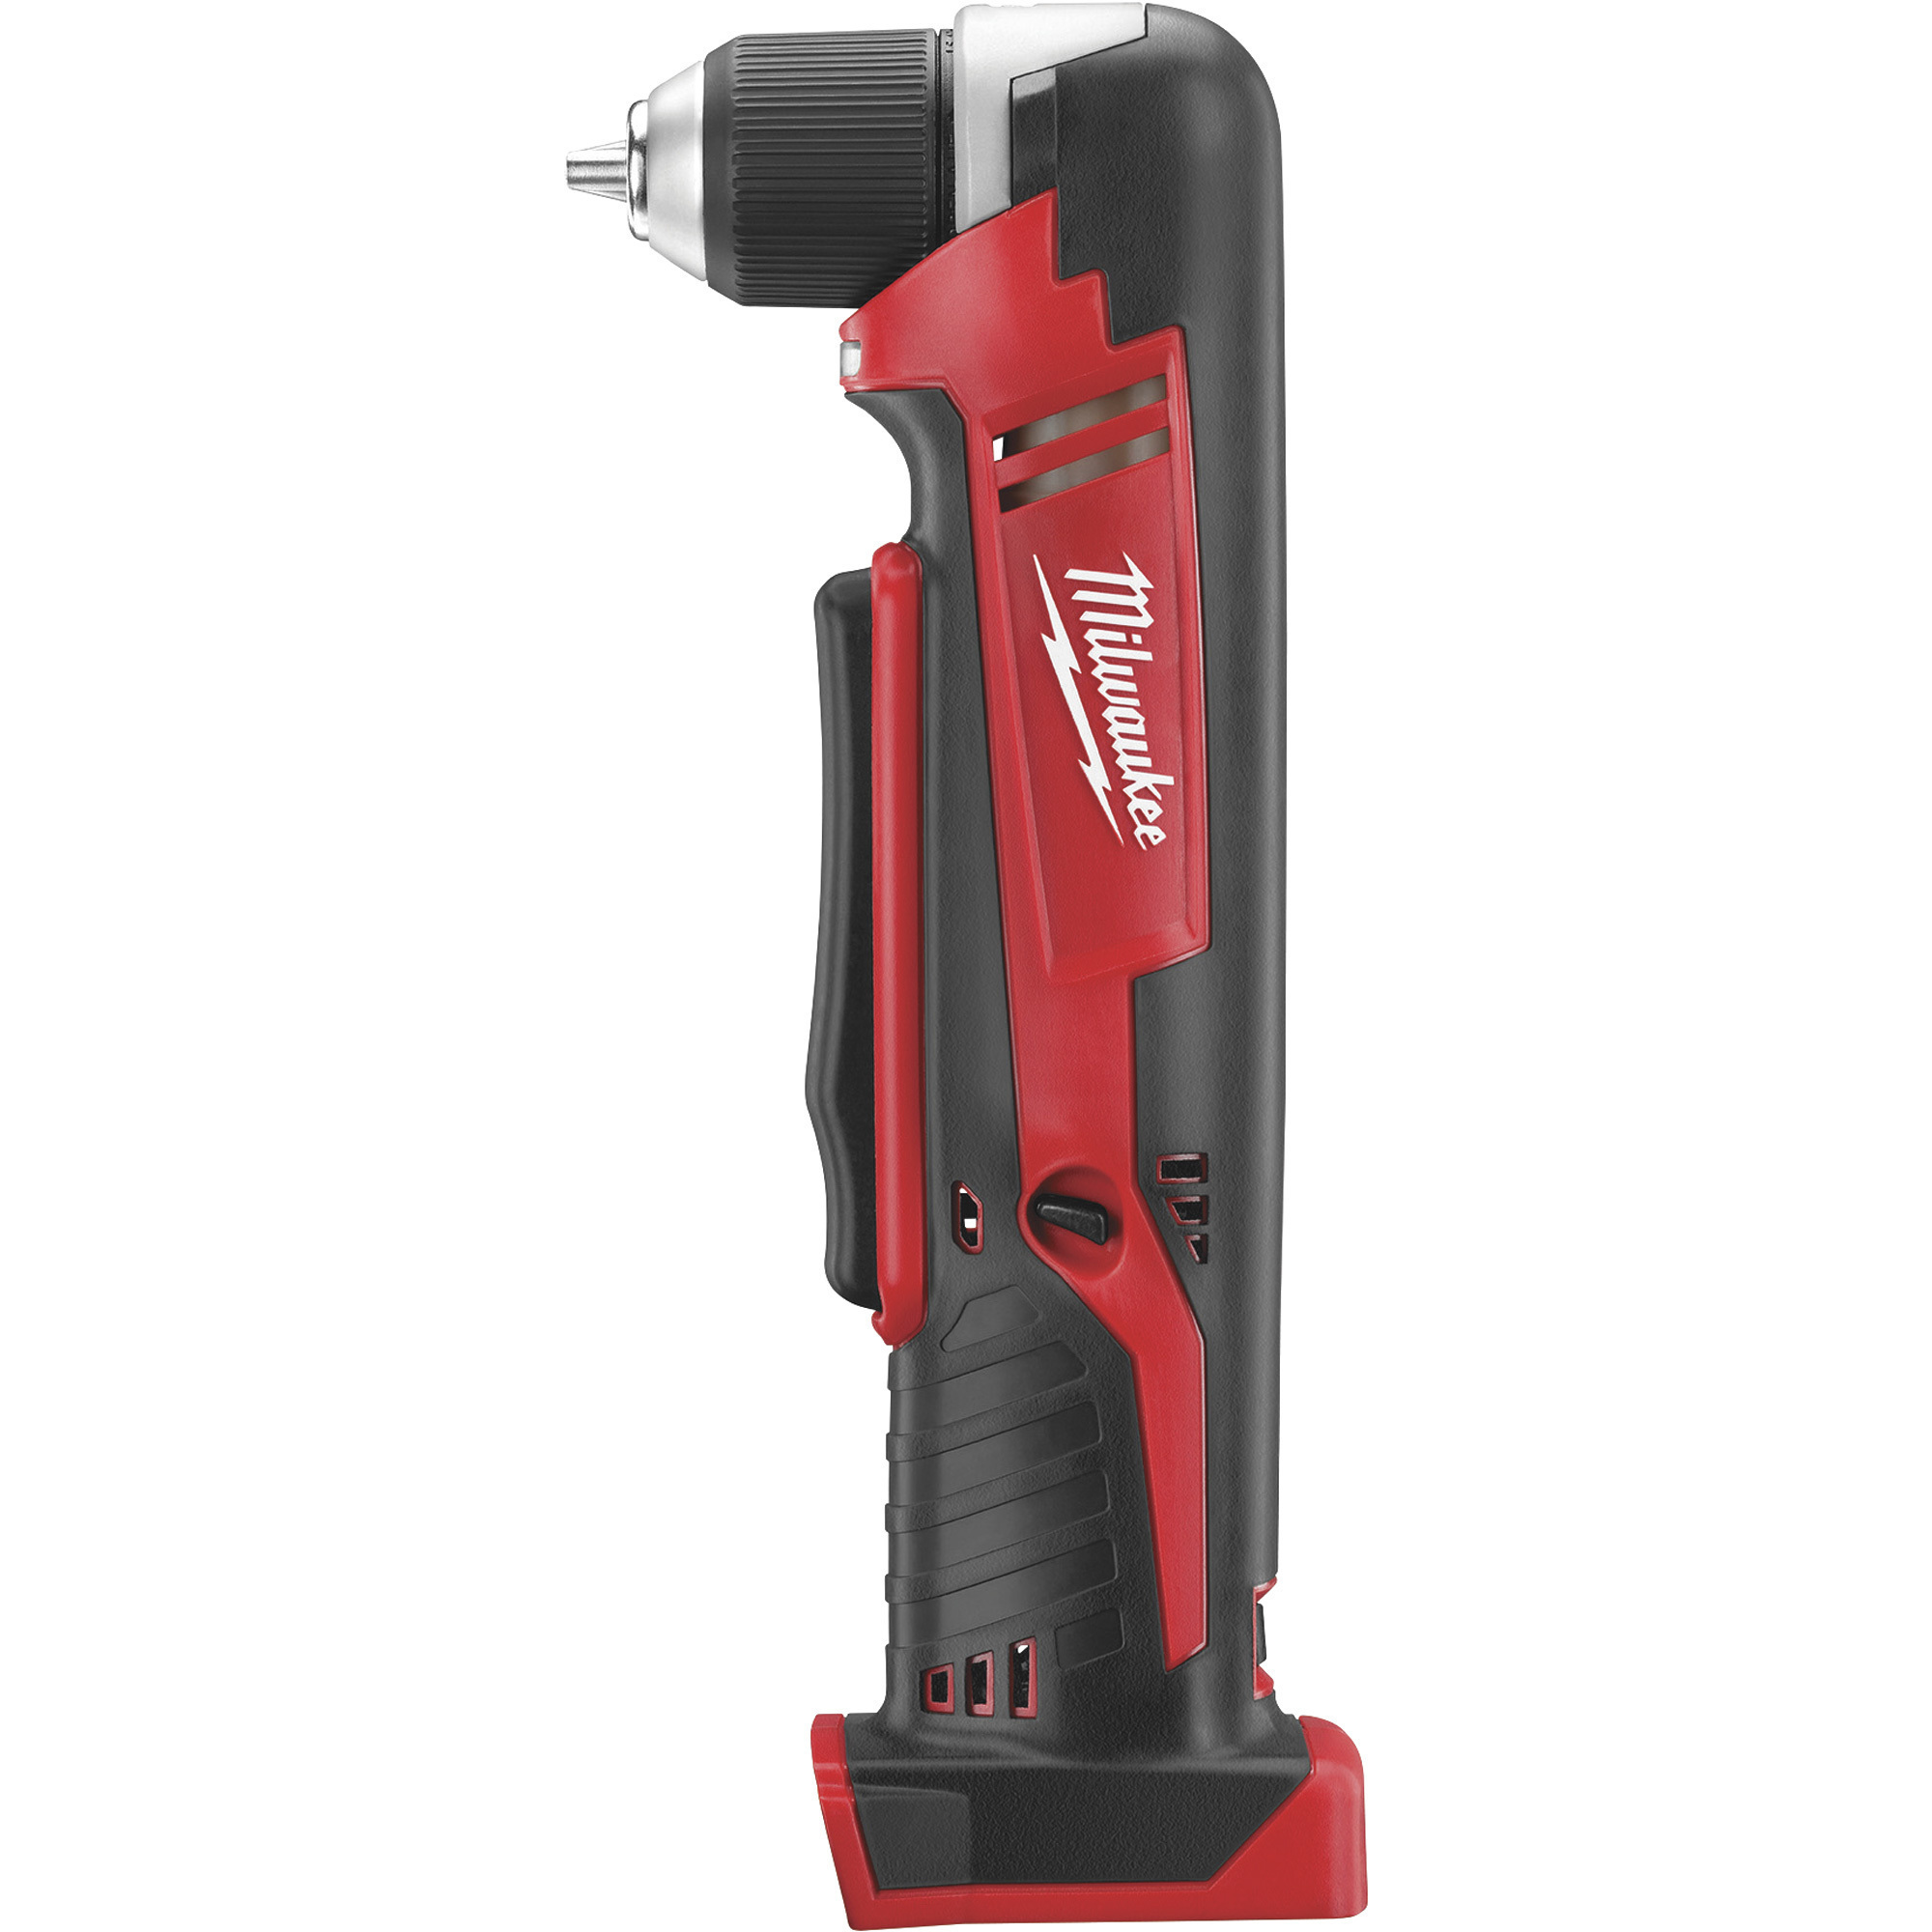 M18 Lithium-Ion Cordless Electric Right Angle Drill — Tool Only, 3/8Inch Keyless Chuck, 125 Ft./Lbs. Torque, 1500 RPM, Model - Milwaukee 2615-20